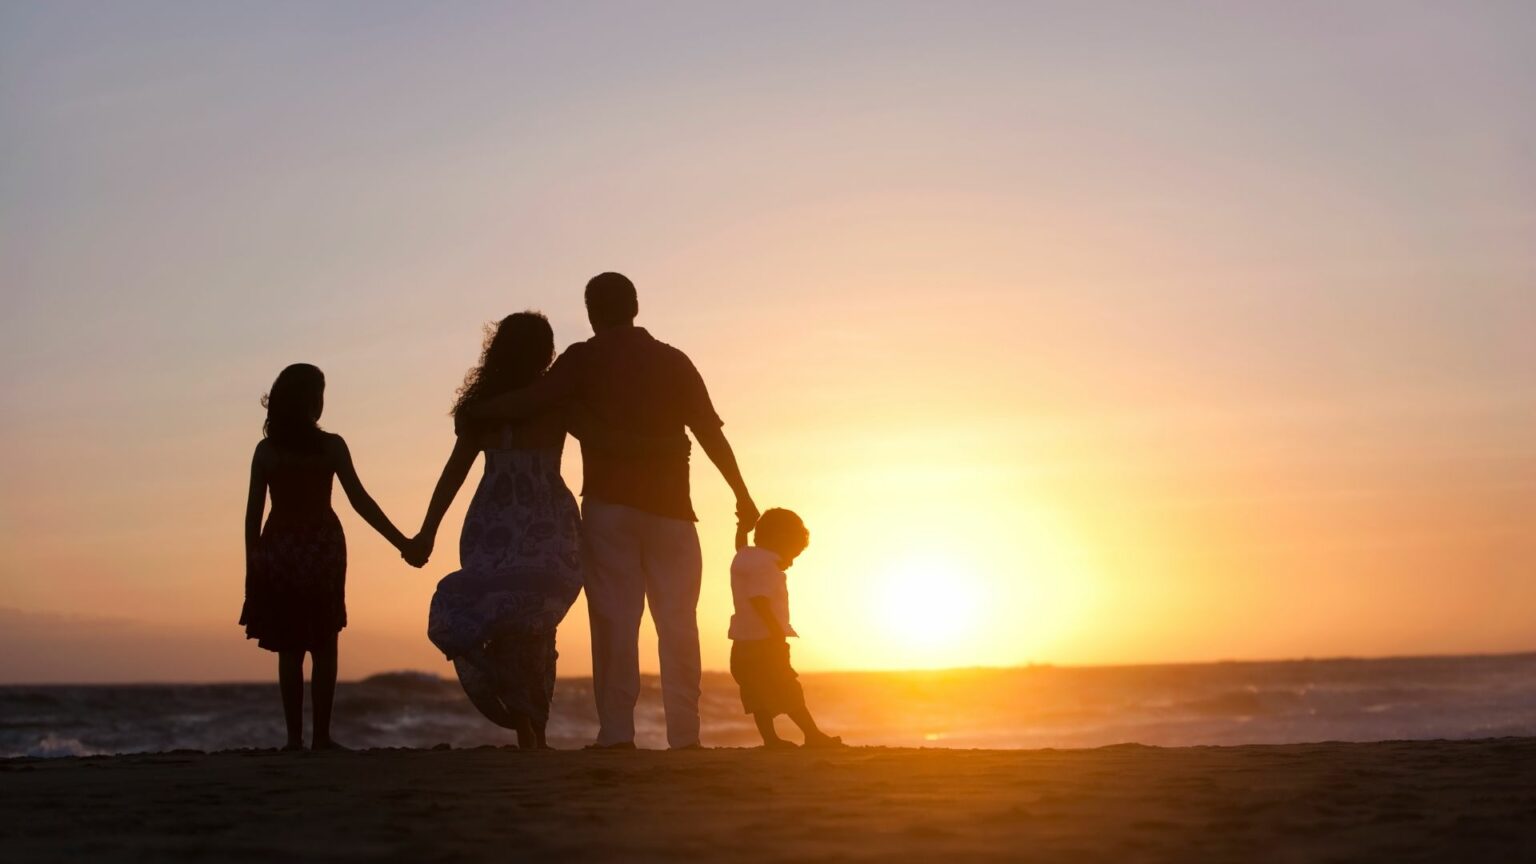 H-2A Worker and Family Enjoying the sunset on a beach